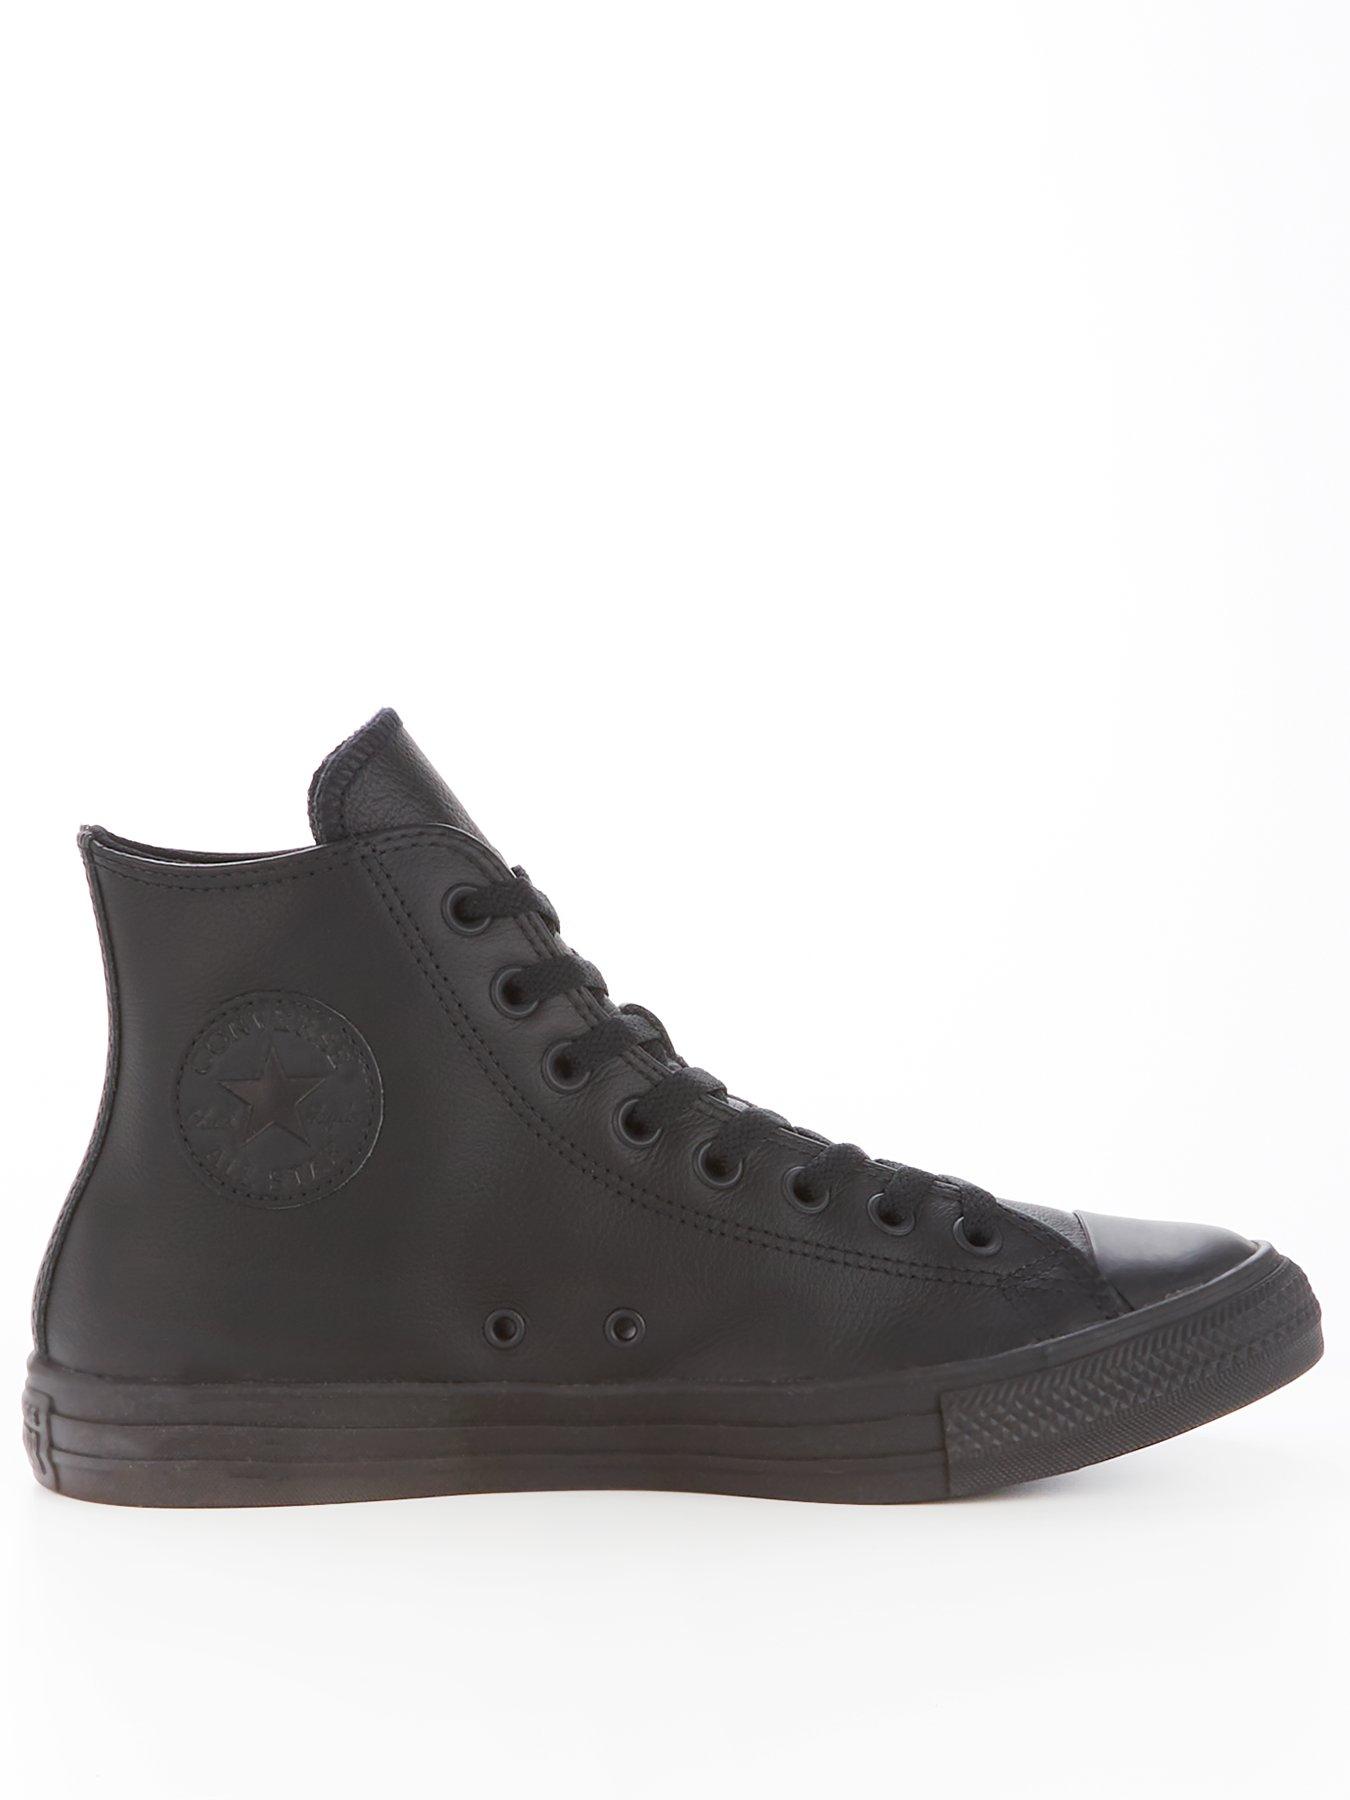 converse all star leather hi men's